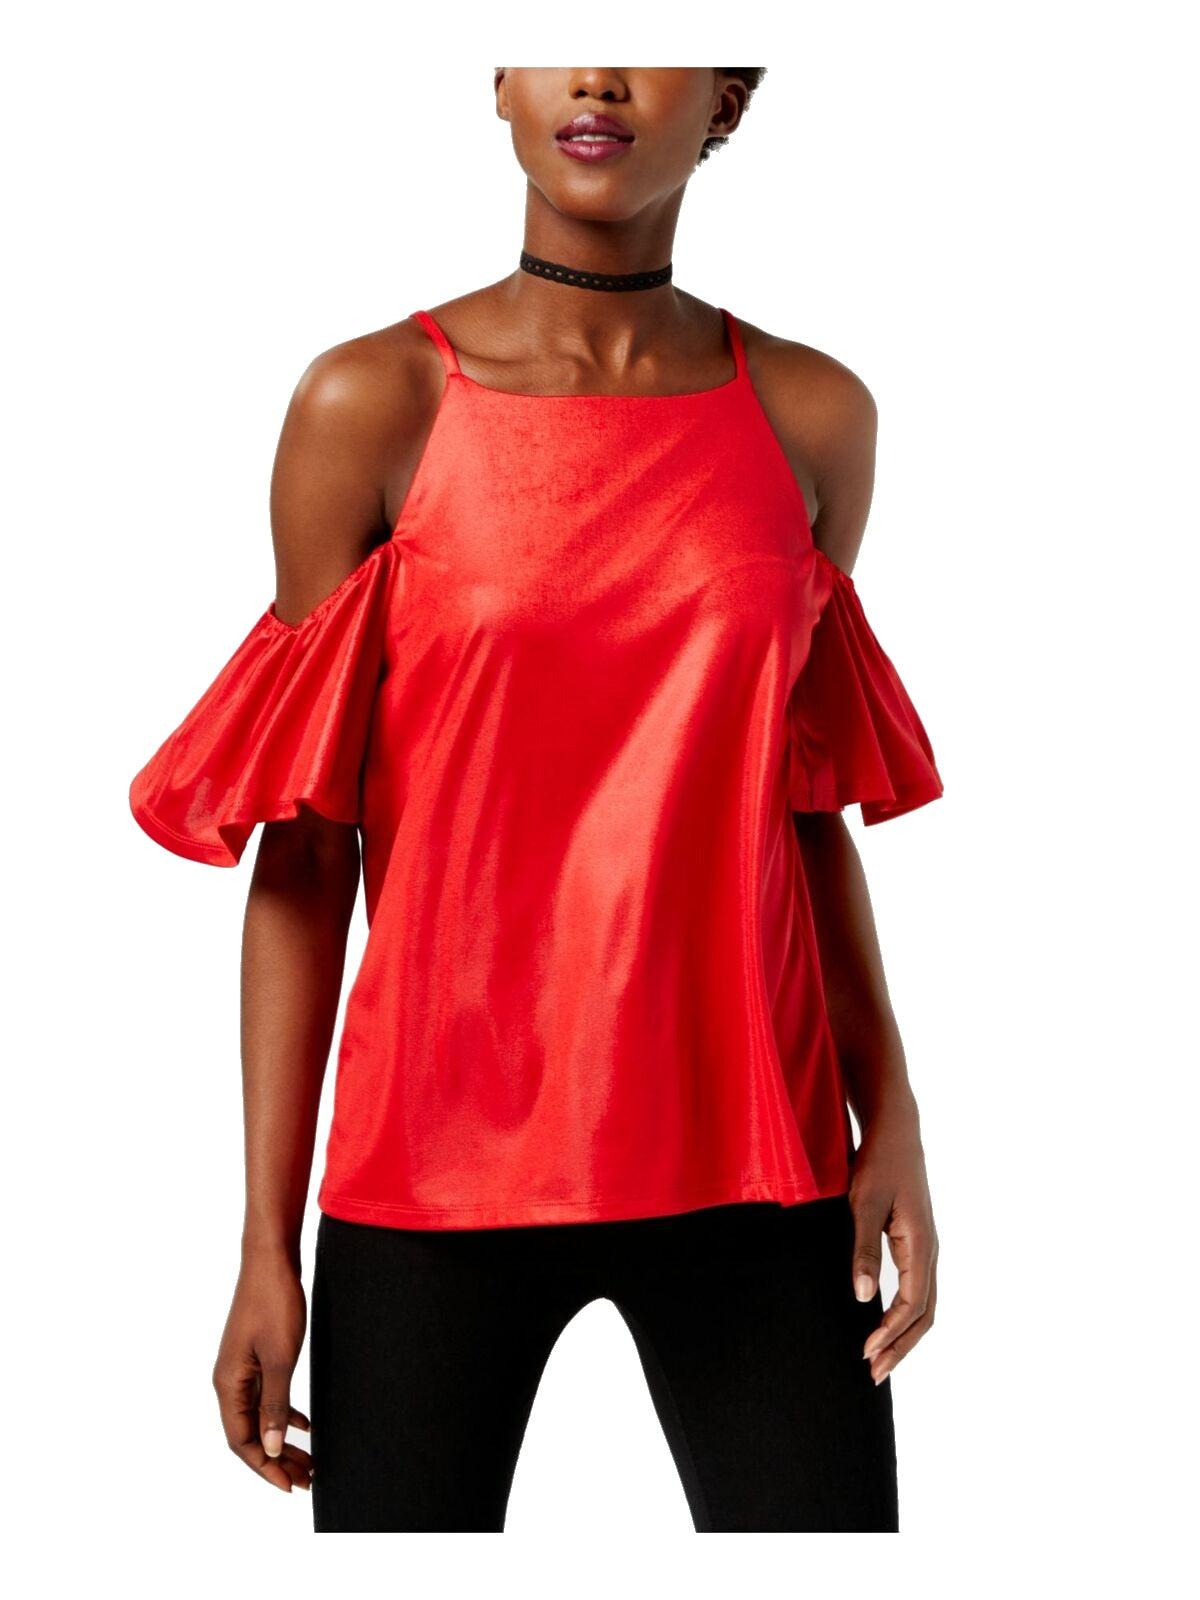 Cold Shoulder Ruffle Shirt Red